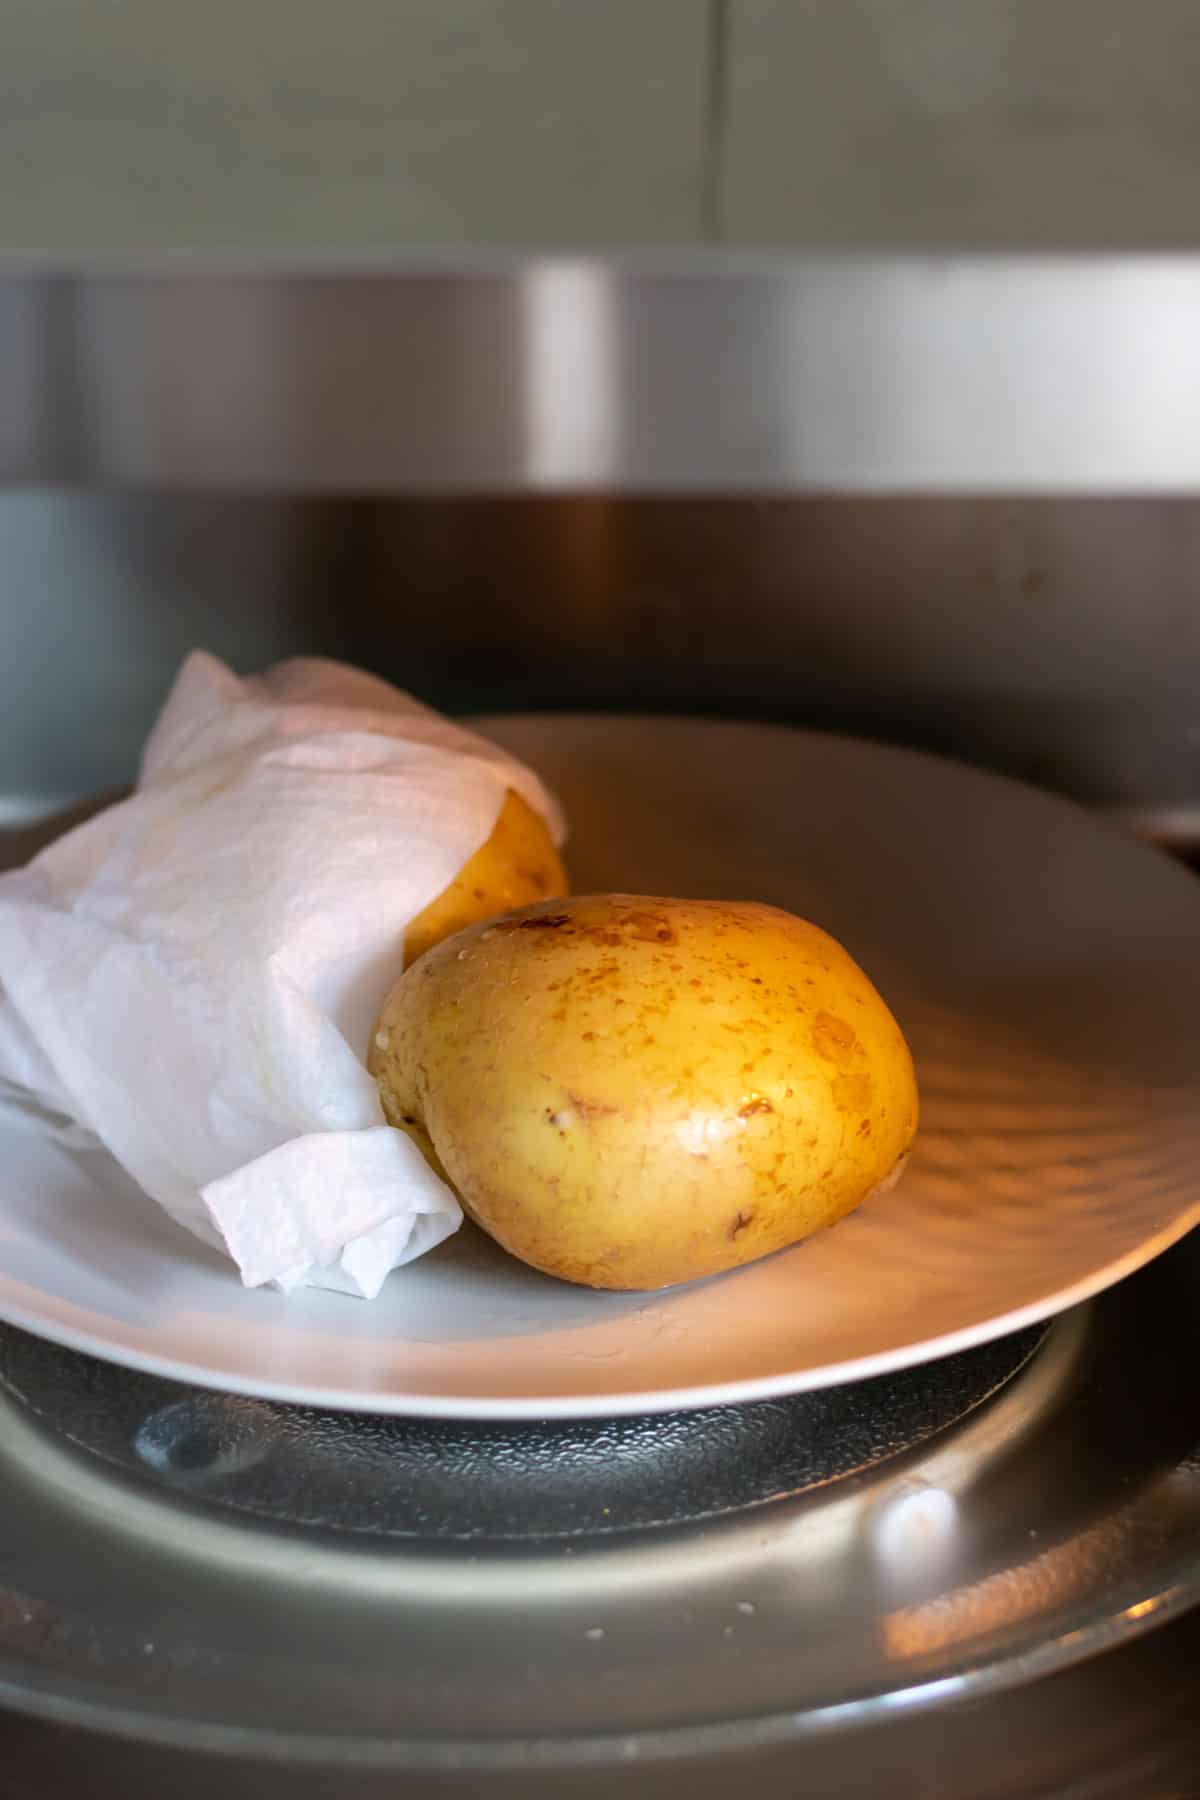 Potatoes cooking in a microwave.